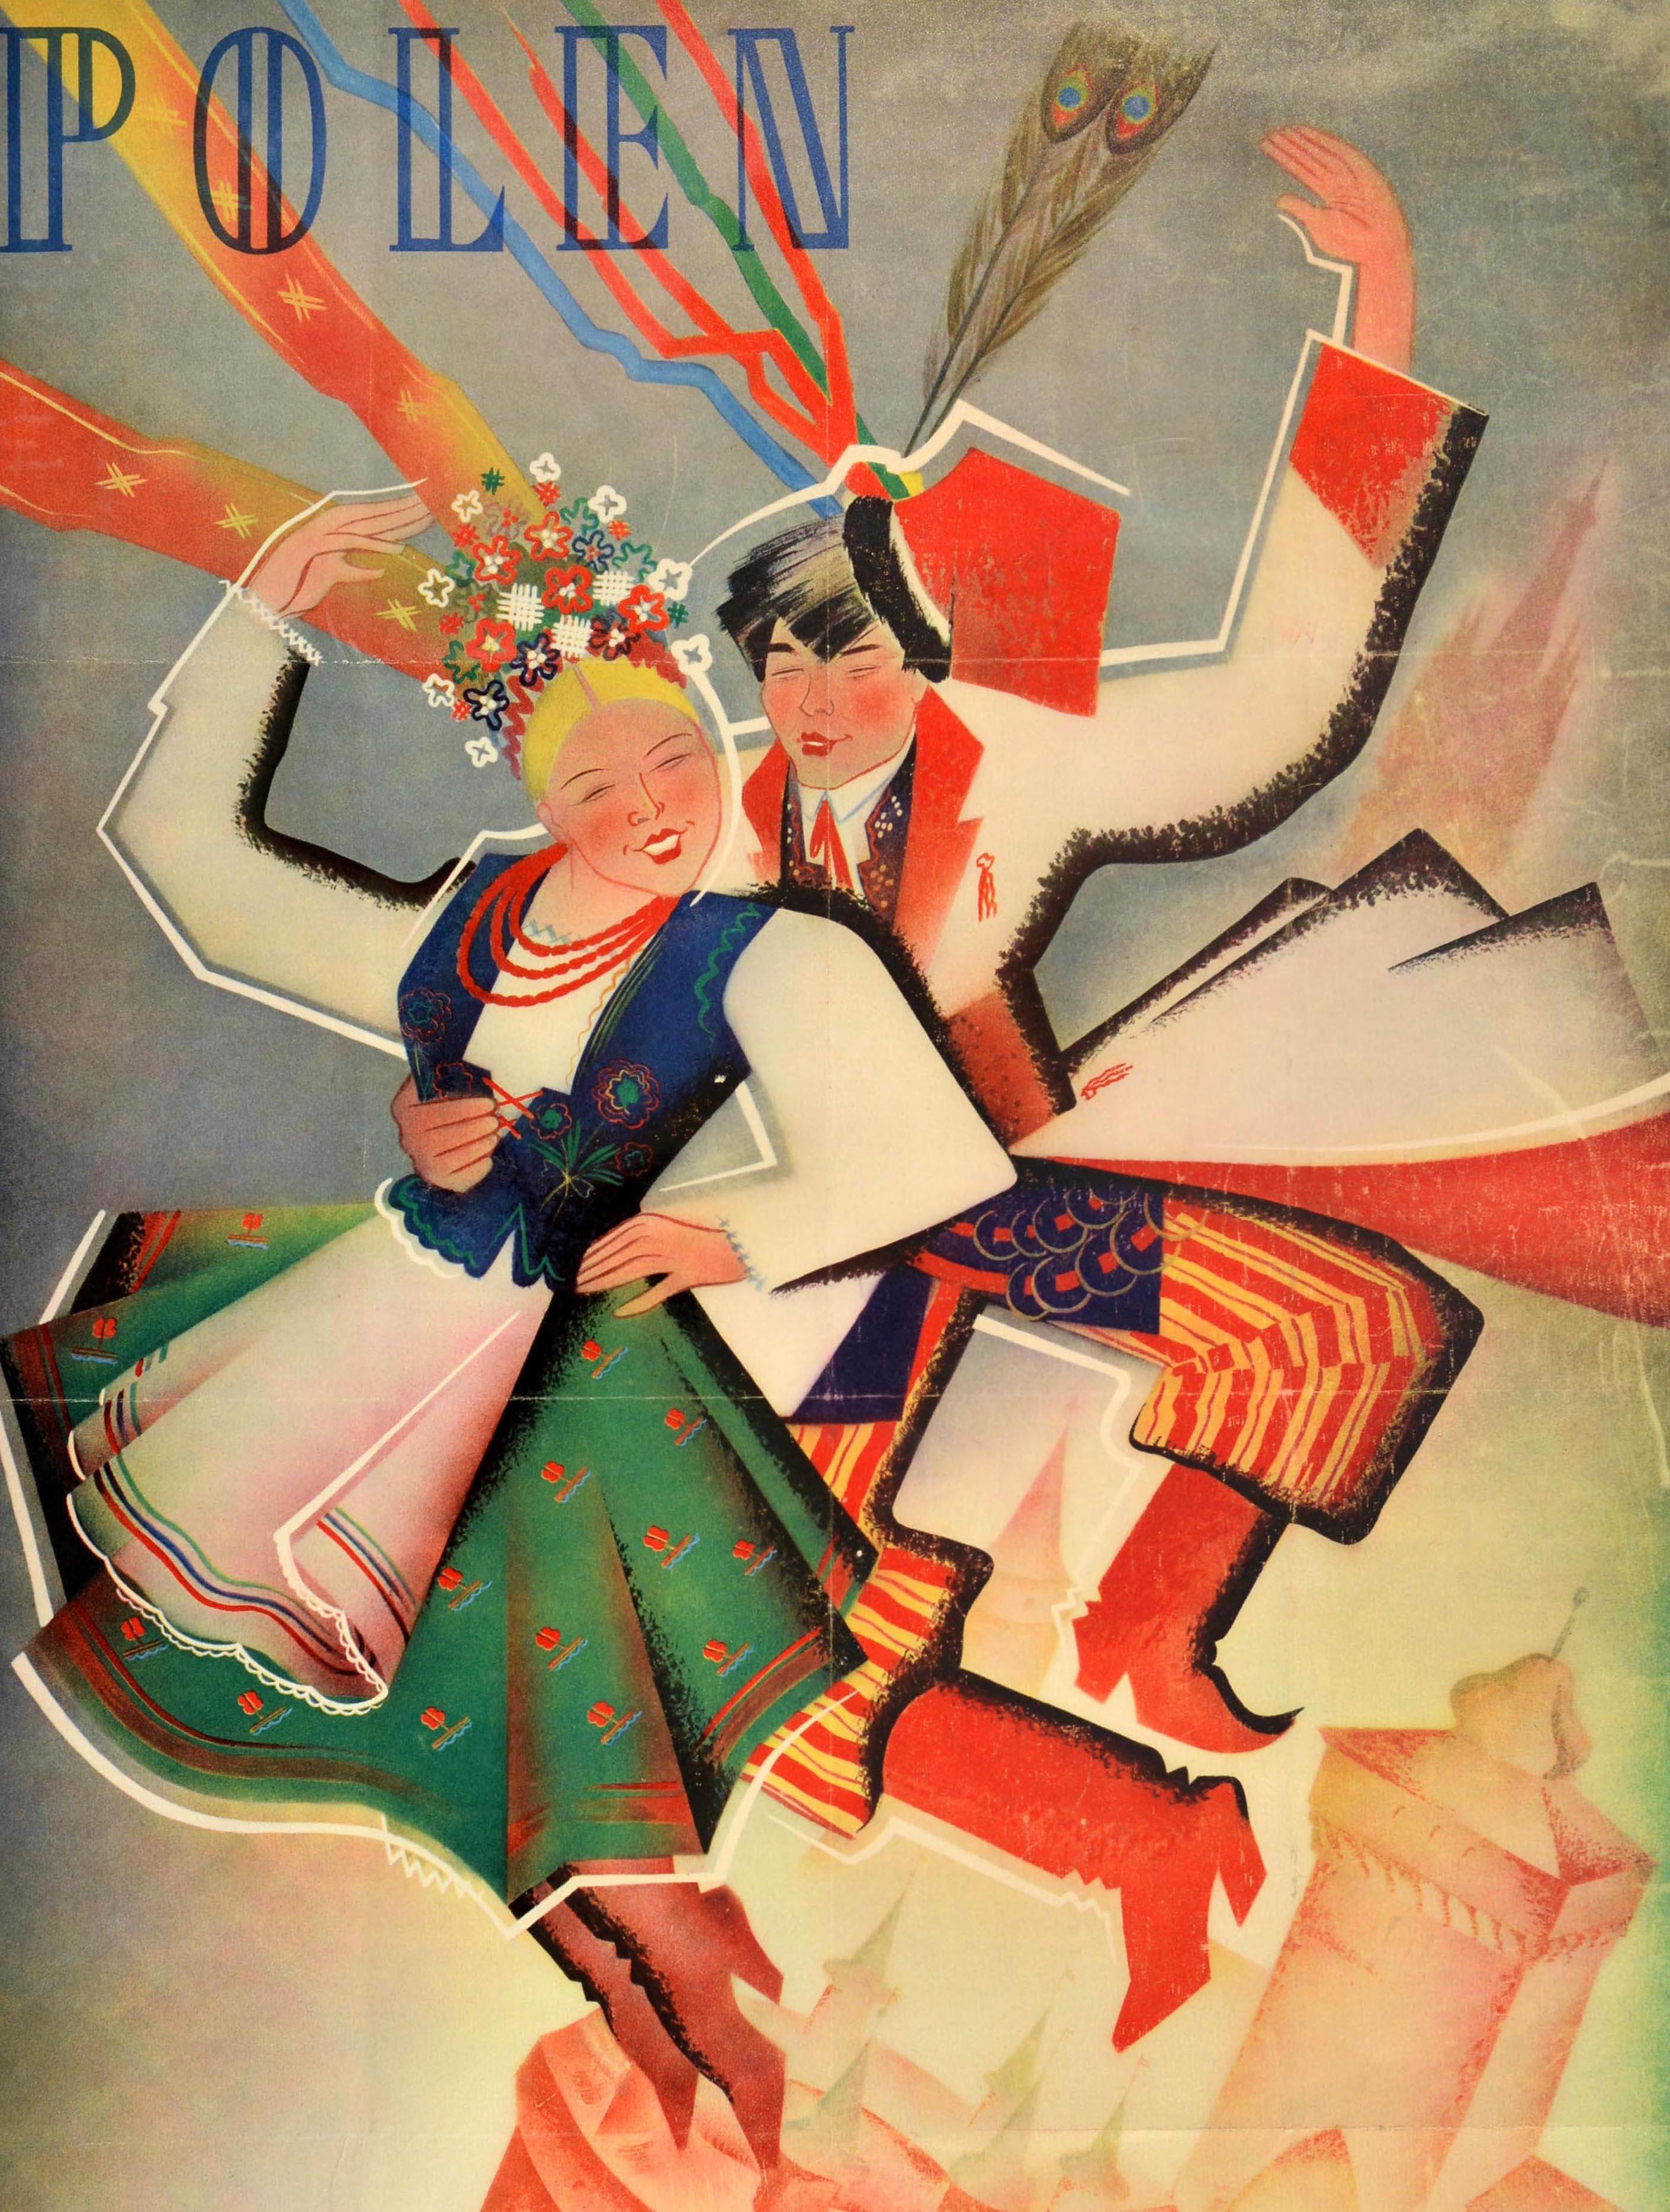 Original vintage travel poster for Polen Krakausche Feestdagen / Poland Krakow Holidays 4-23 June 1938 showing a couple in traditional dress dancing with the old medieval walled town in the background, the lady wearing a colourful skirt and